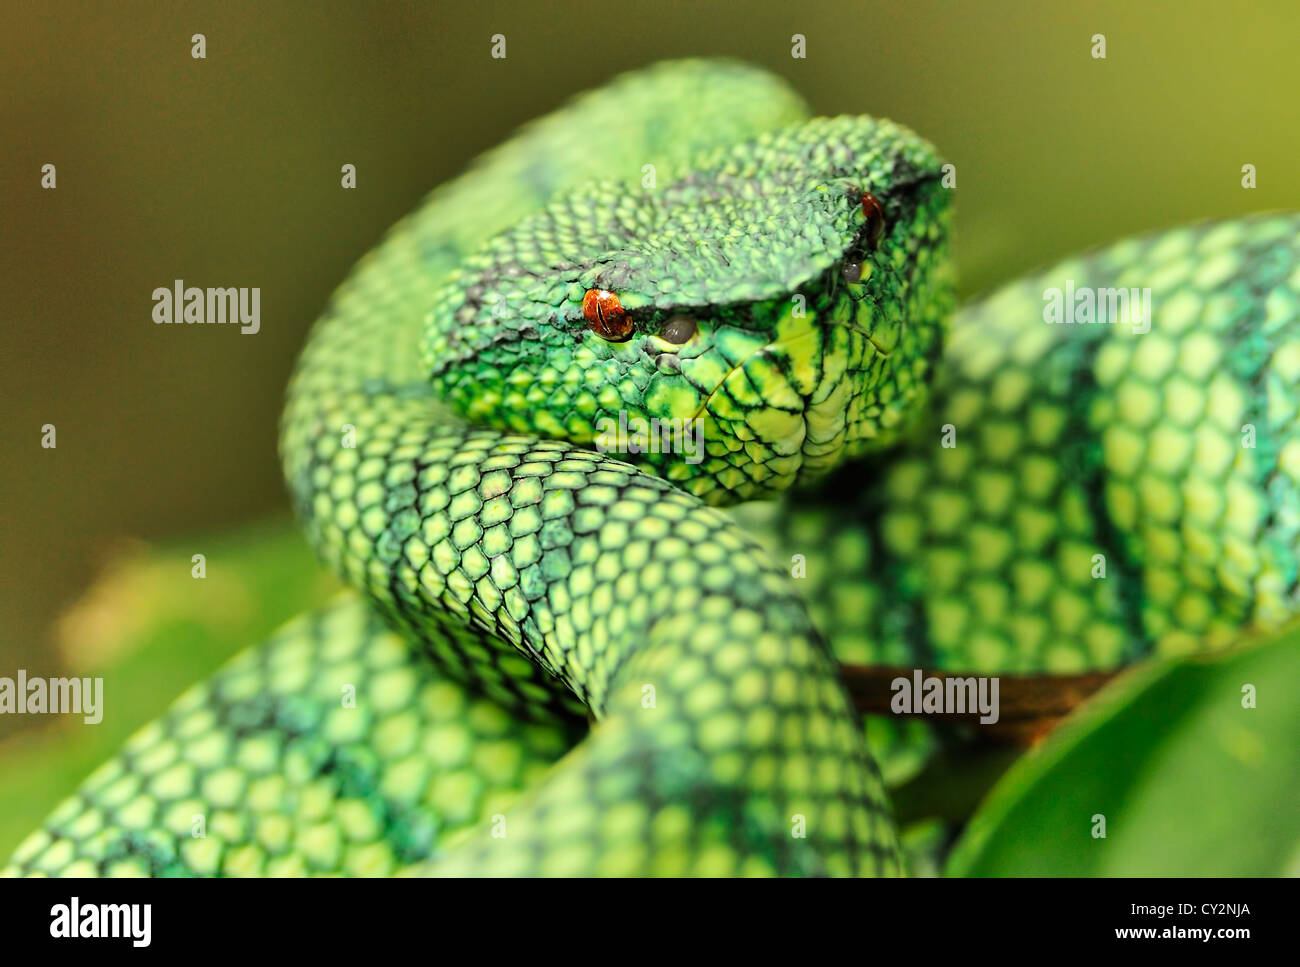 Wagler's Pit Viper on the branch, Sabah, Borneo, Malaysia Stock Photo